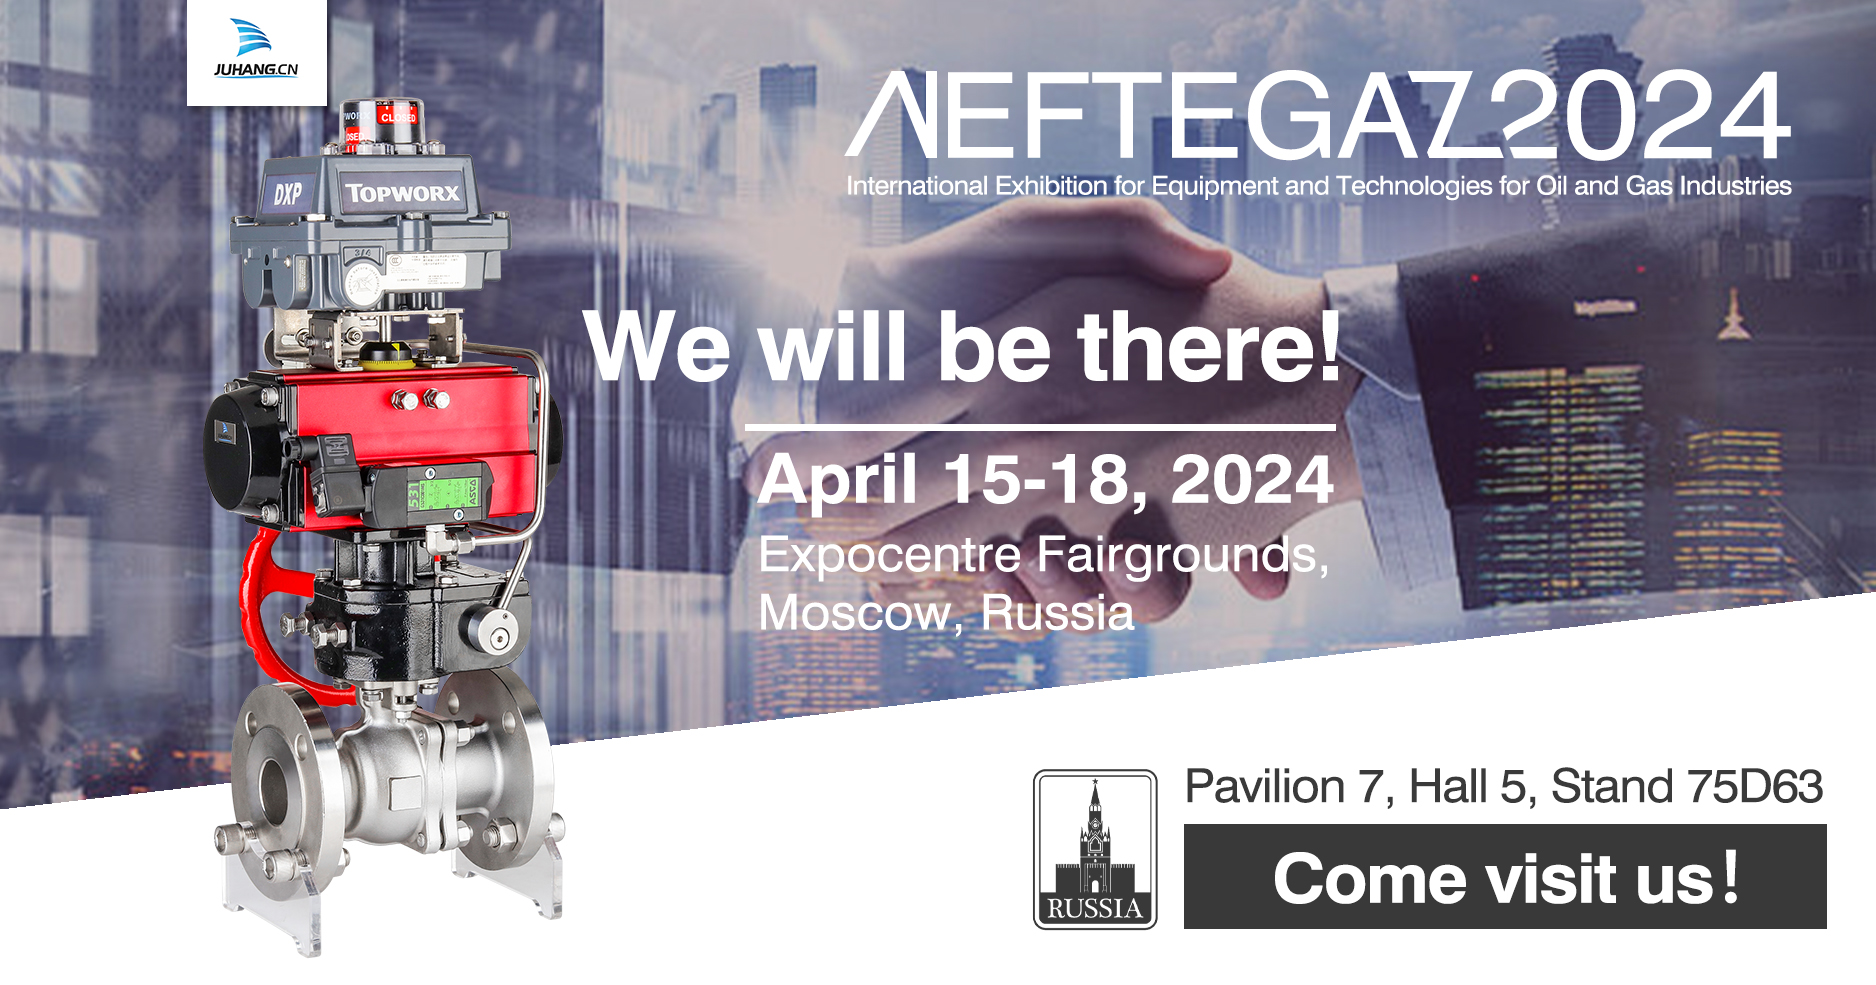 【 Invitation 】 Juhang sincerely invites you to participate in the NEFTEGAZ 2024 exhibition